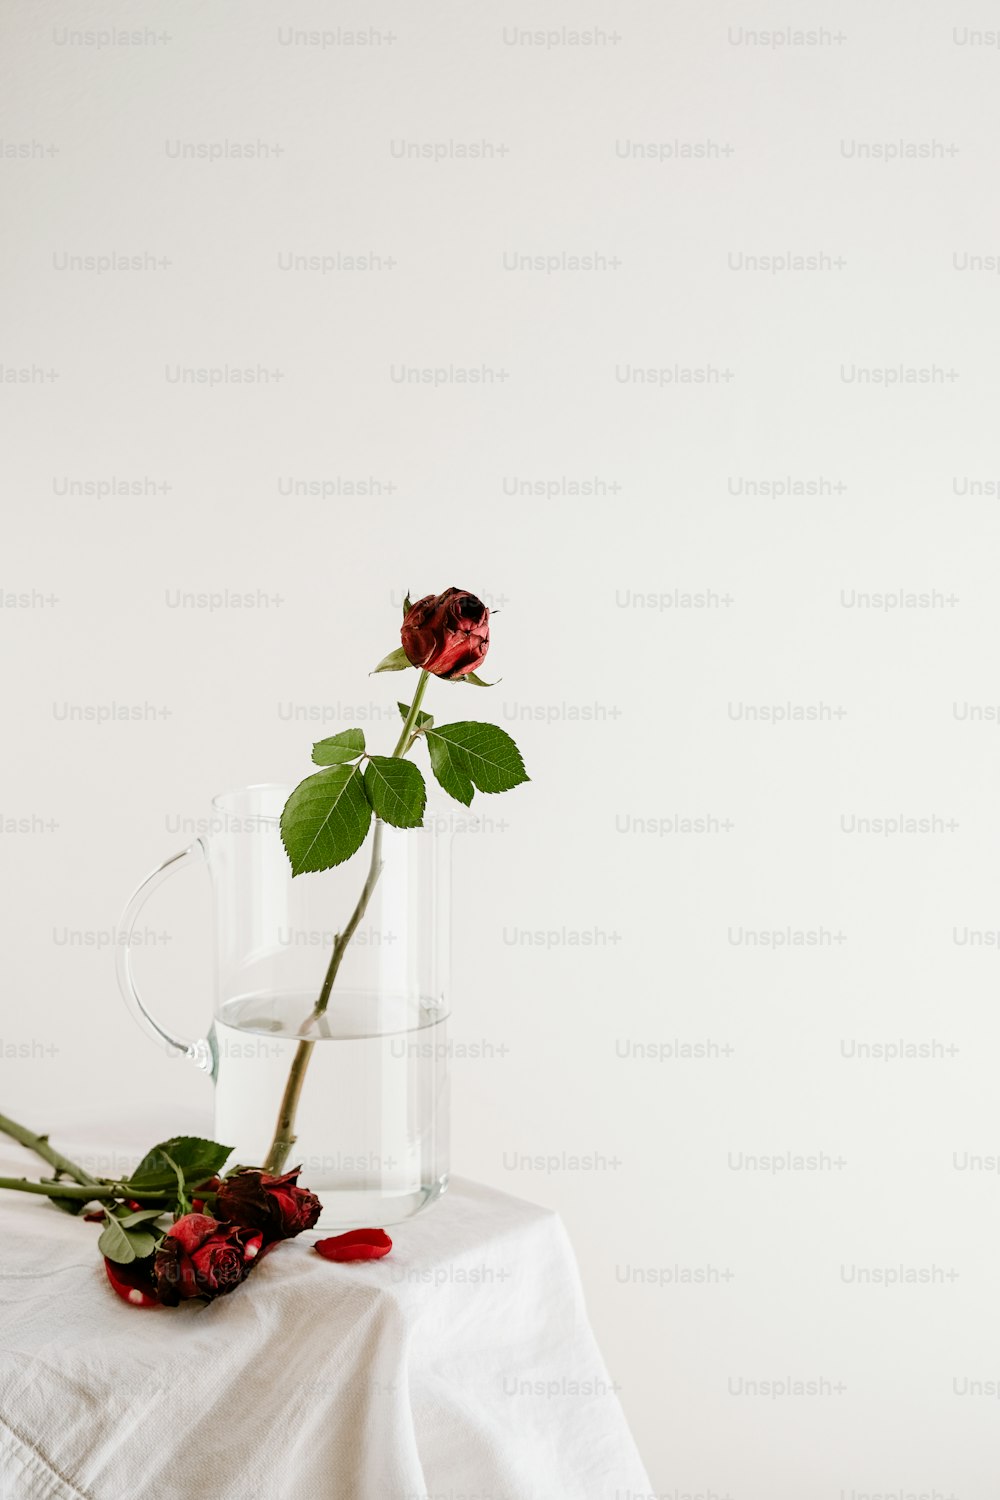 a single rose in a glass vase on a table